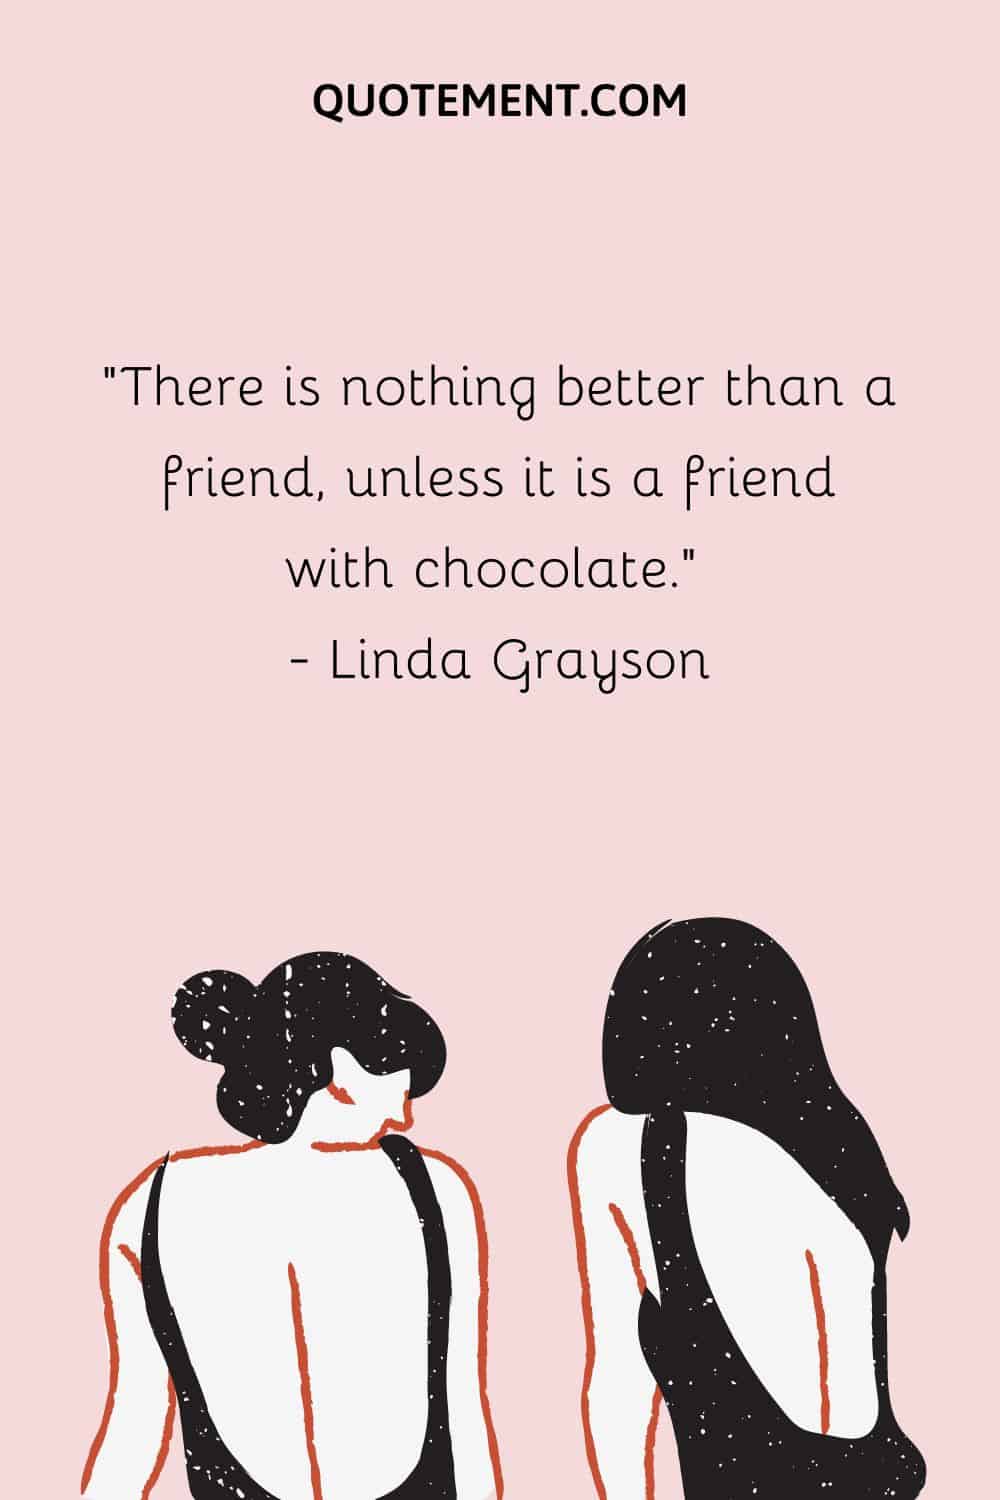 There is nothing better than a friend, unless it is a friend with chocolate